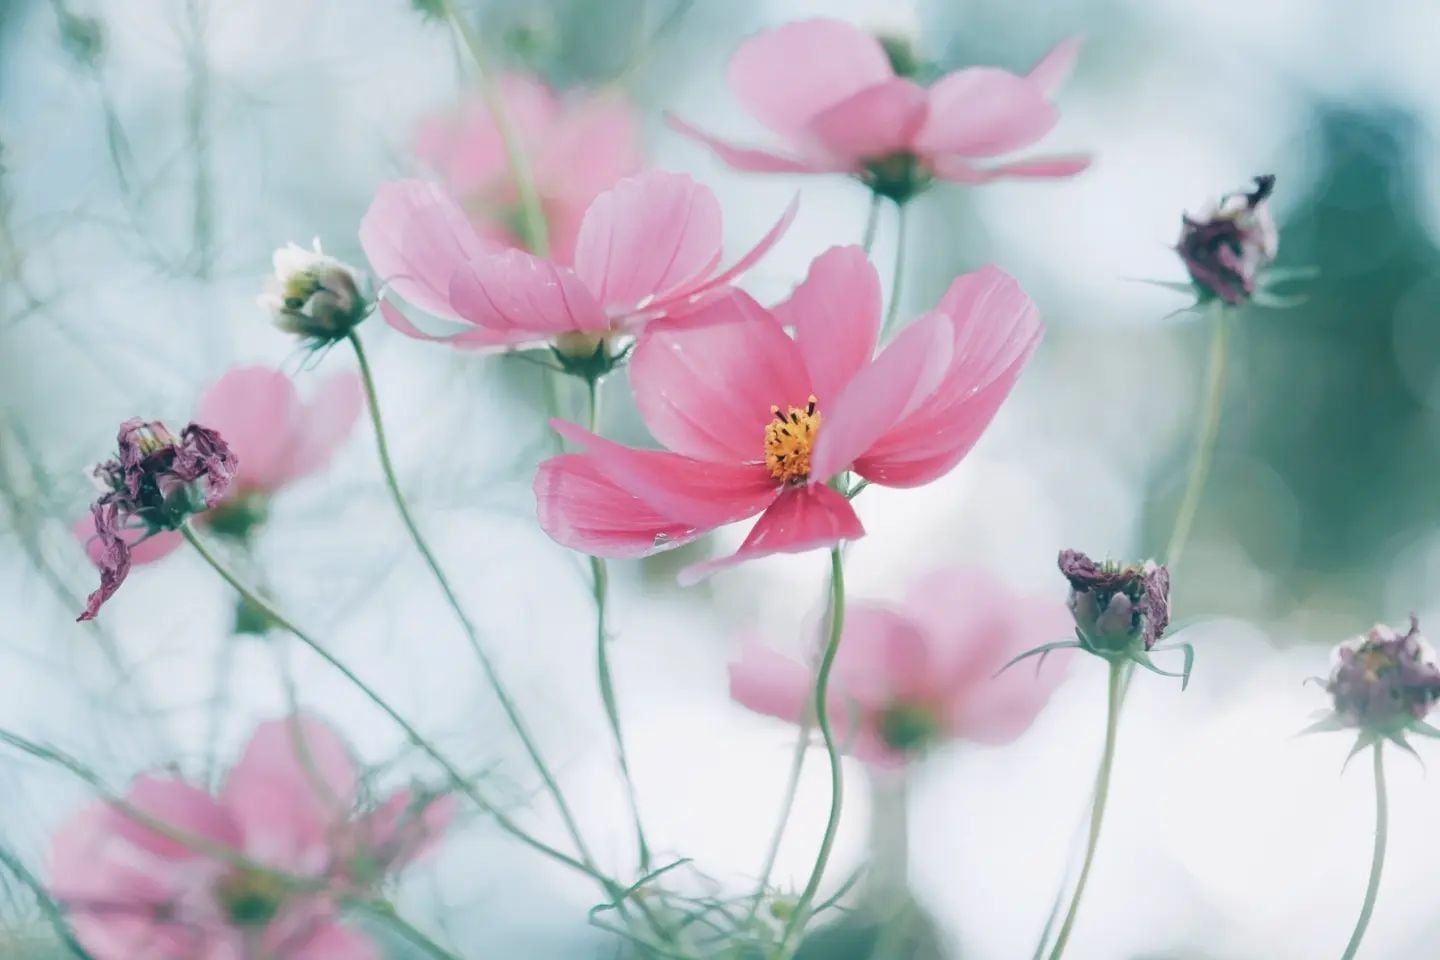 A close up of pink flowers with a soft focus background - Macro